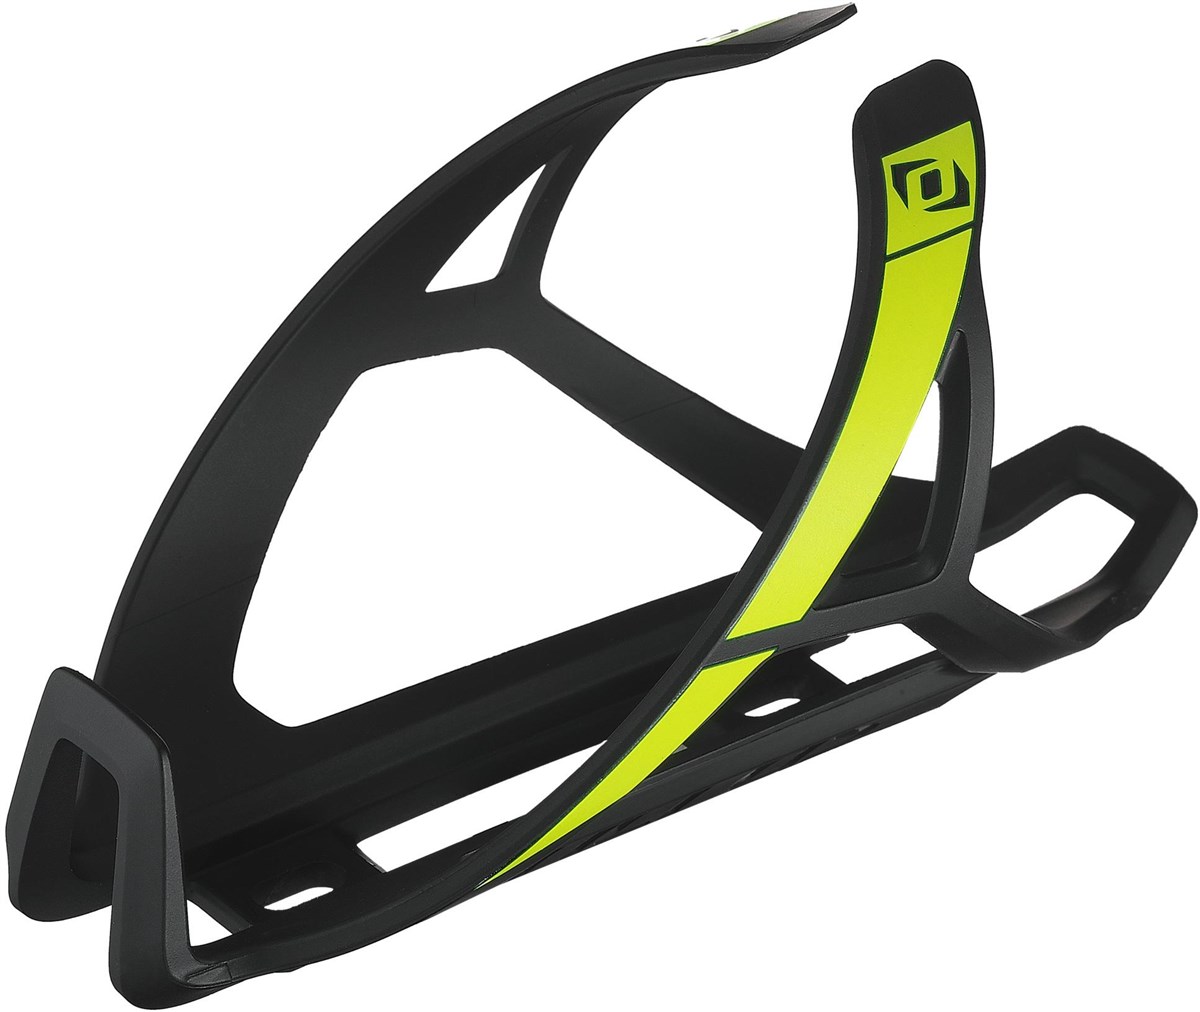 Syncros Composite 1.5 Bottle Cage product image